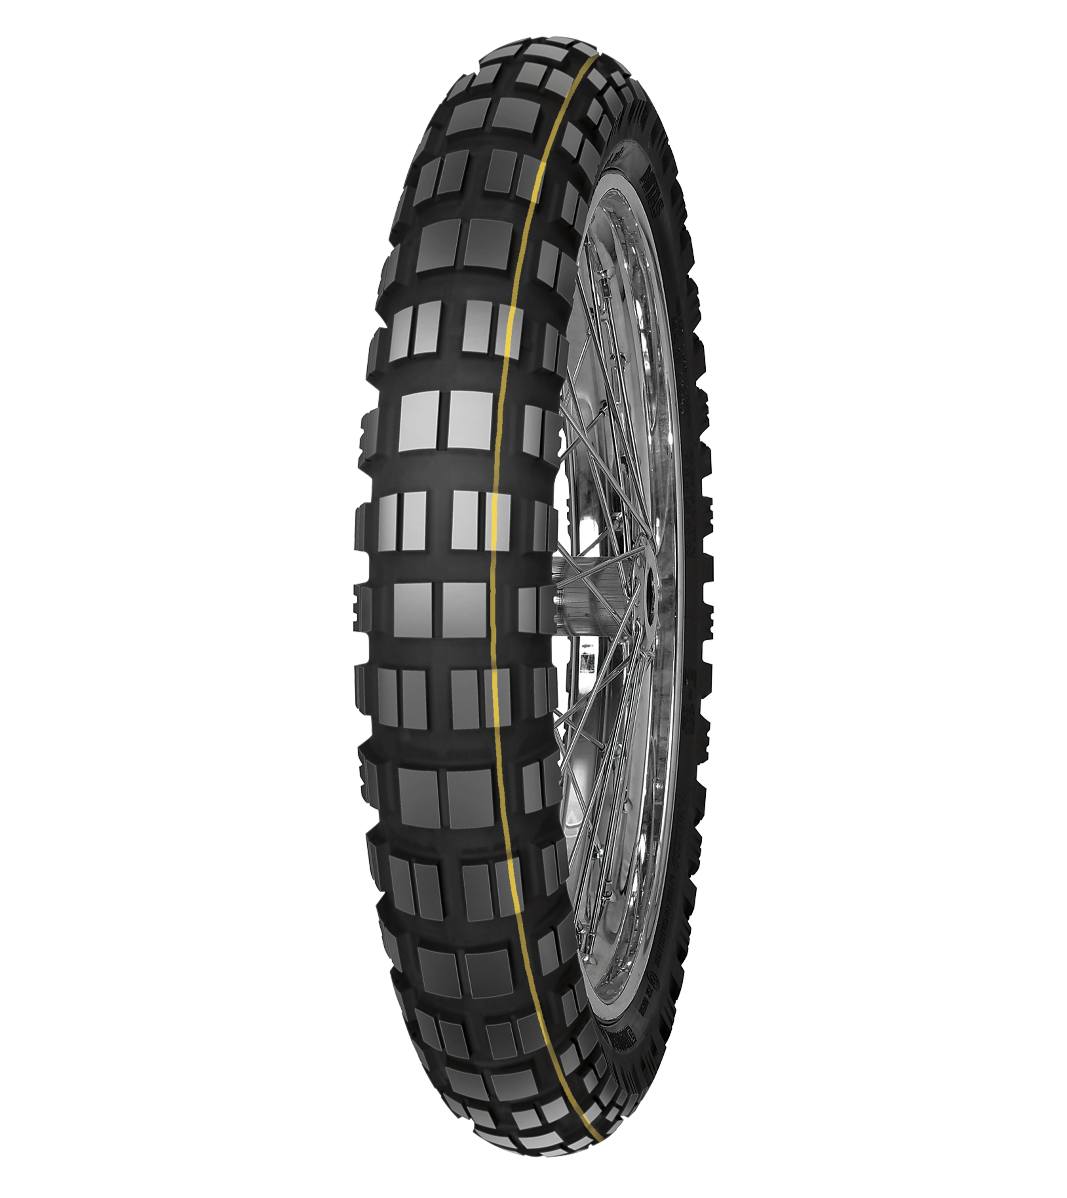 Mitas E-10 ENDURO 110/80B19 Trail OFF Trail DAKAR 59T Yellow Tubeless Front Tire, 224443, 110/80B19, Adventure Touring, E Series, E-10 Enduro, Front, Trail, Trail OFF, Tires - Imported and distributed in North &amp; South America by Lindeco Genuine Powersports - Premier Powersports Equipment and Accessories for Motorcycle Enthusiasts, Professional Riders and Dealers.